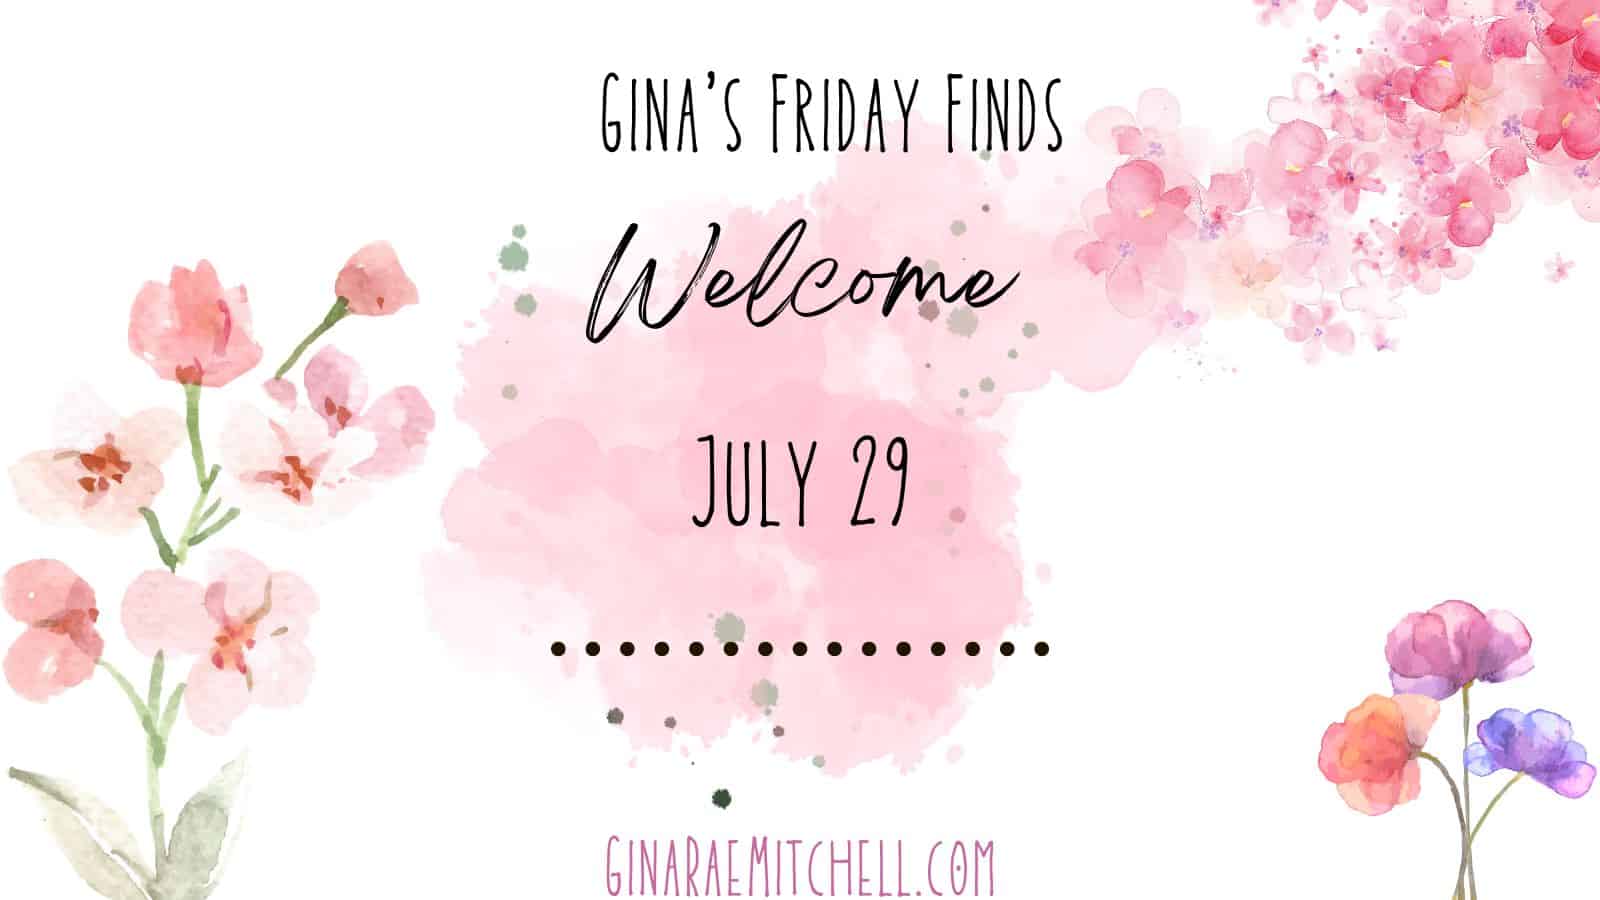 Friday Finds for 29 July 2022 | Author News, New Releases, Delicious Recipes, & more